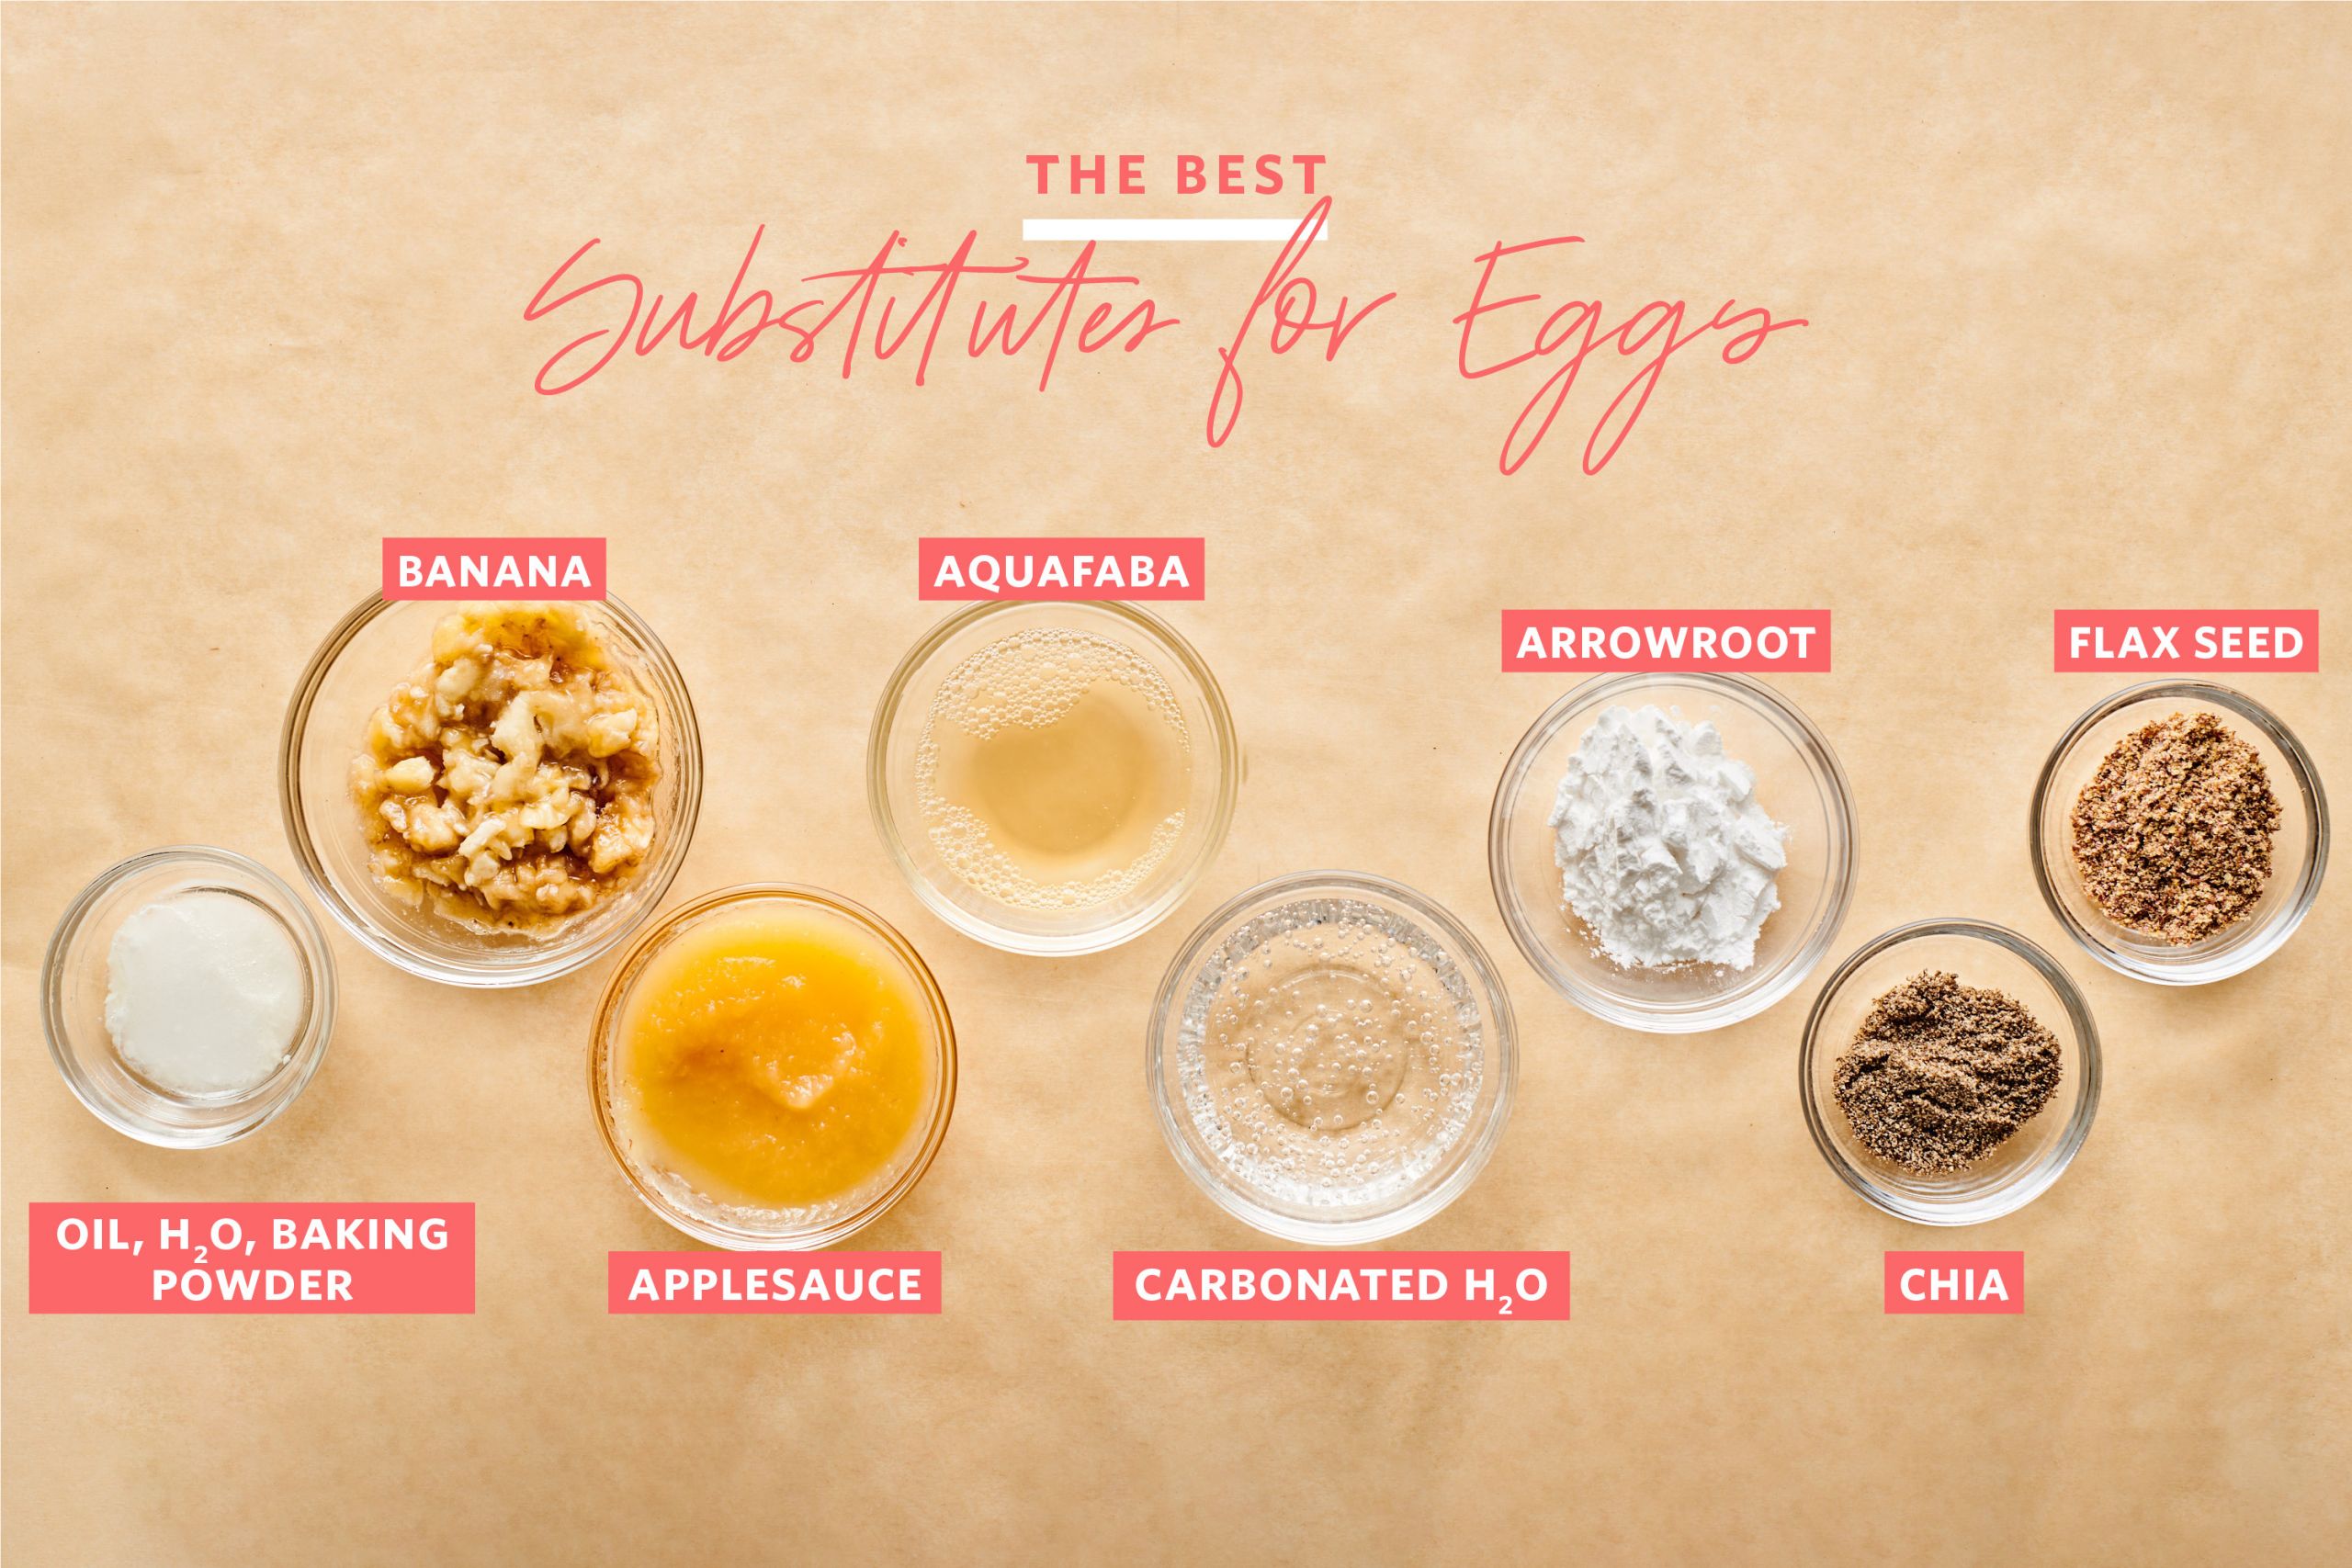 Egg Substitutes for Bread Beautiful What Can You Substitute for Eggs In Banana Bread Banana